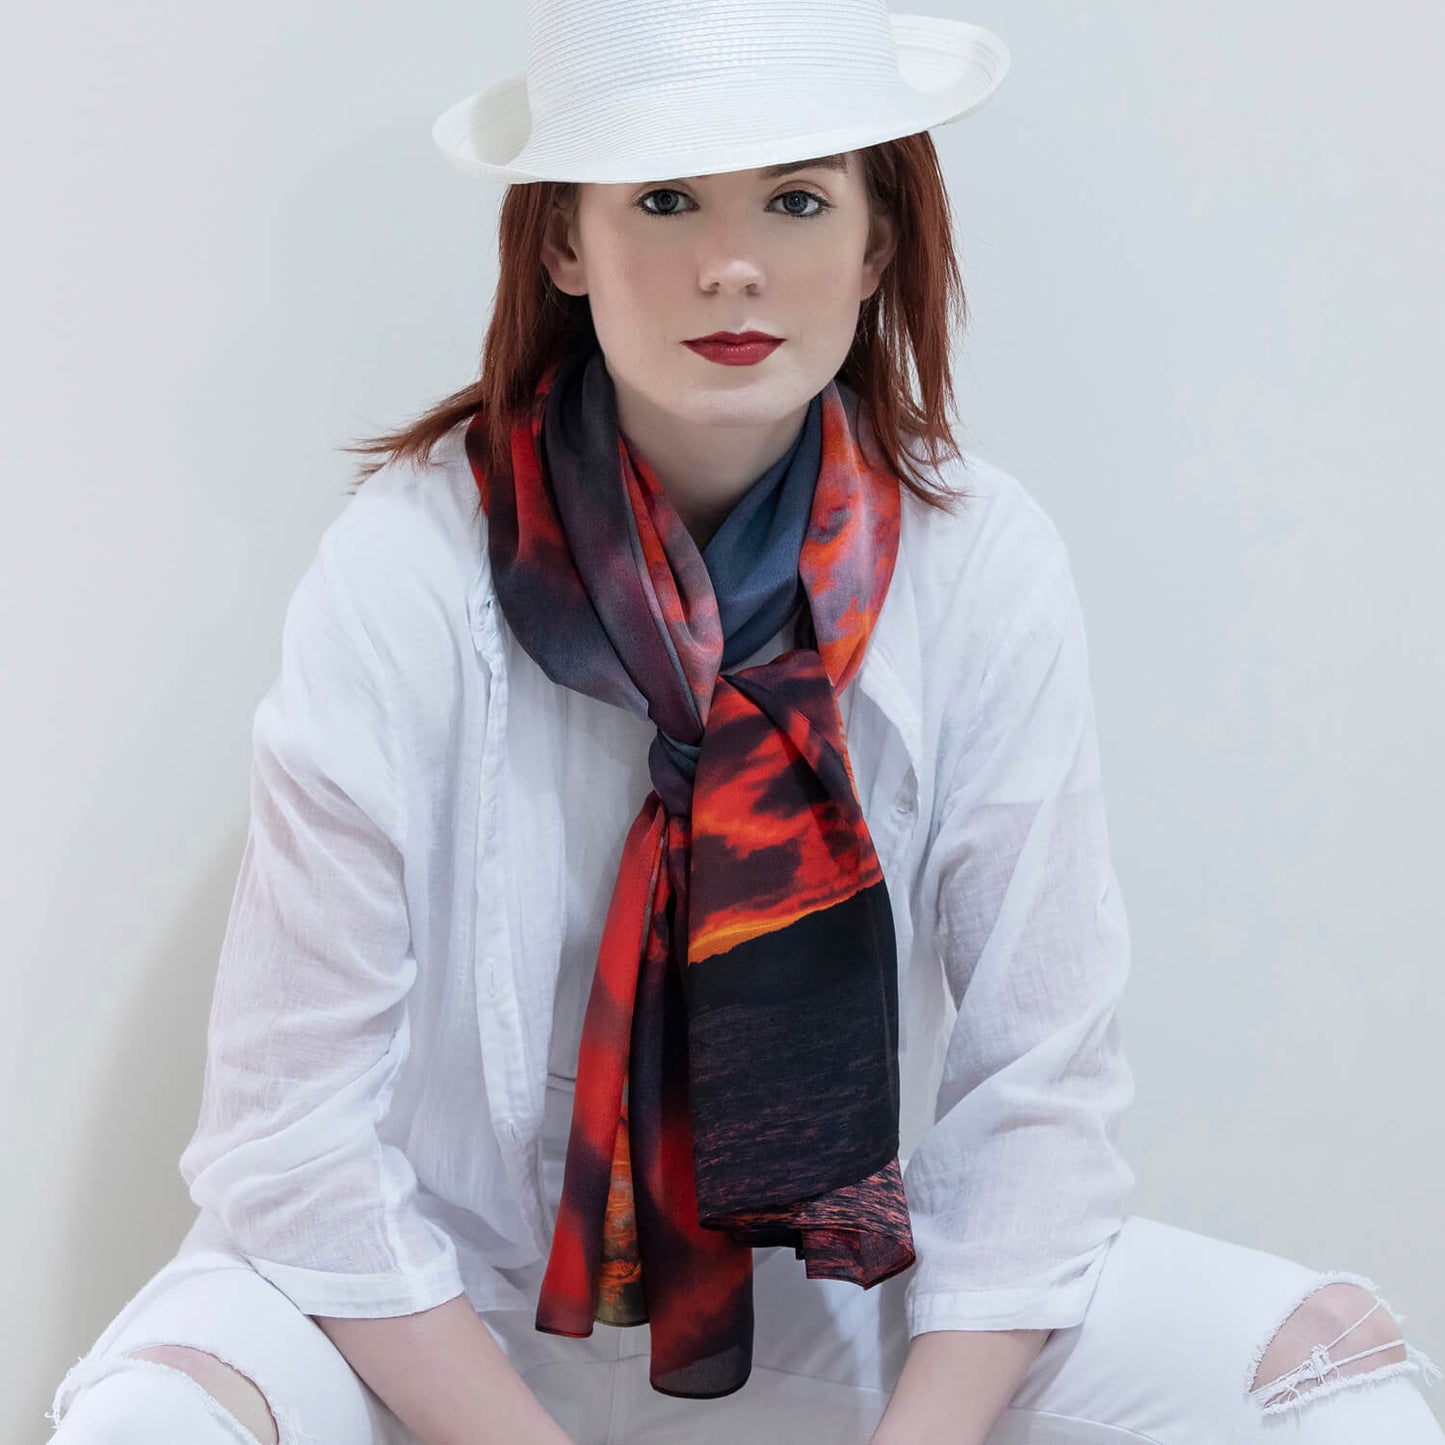 lady in white wearing red hot silk scarf by seahorse silks